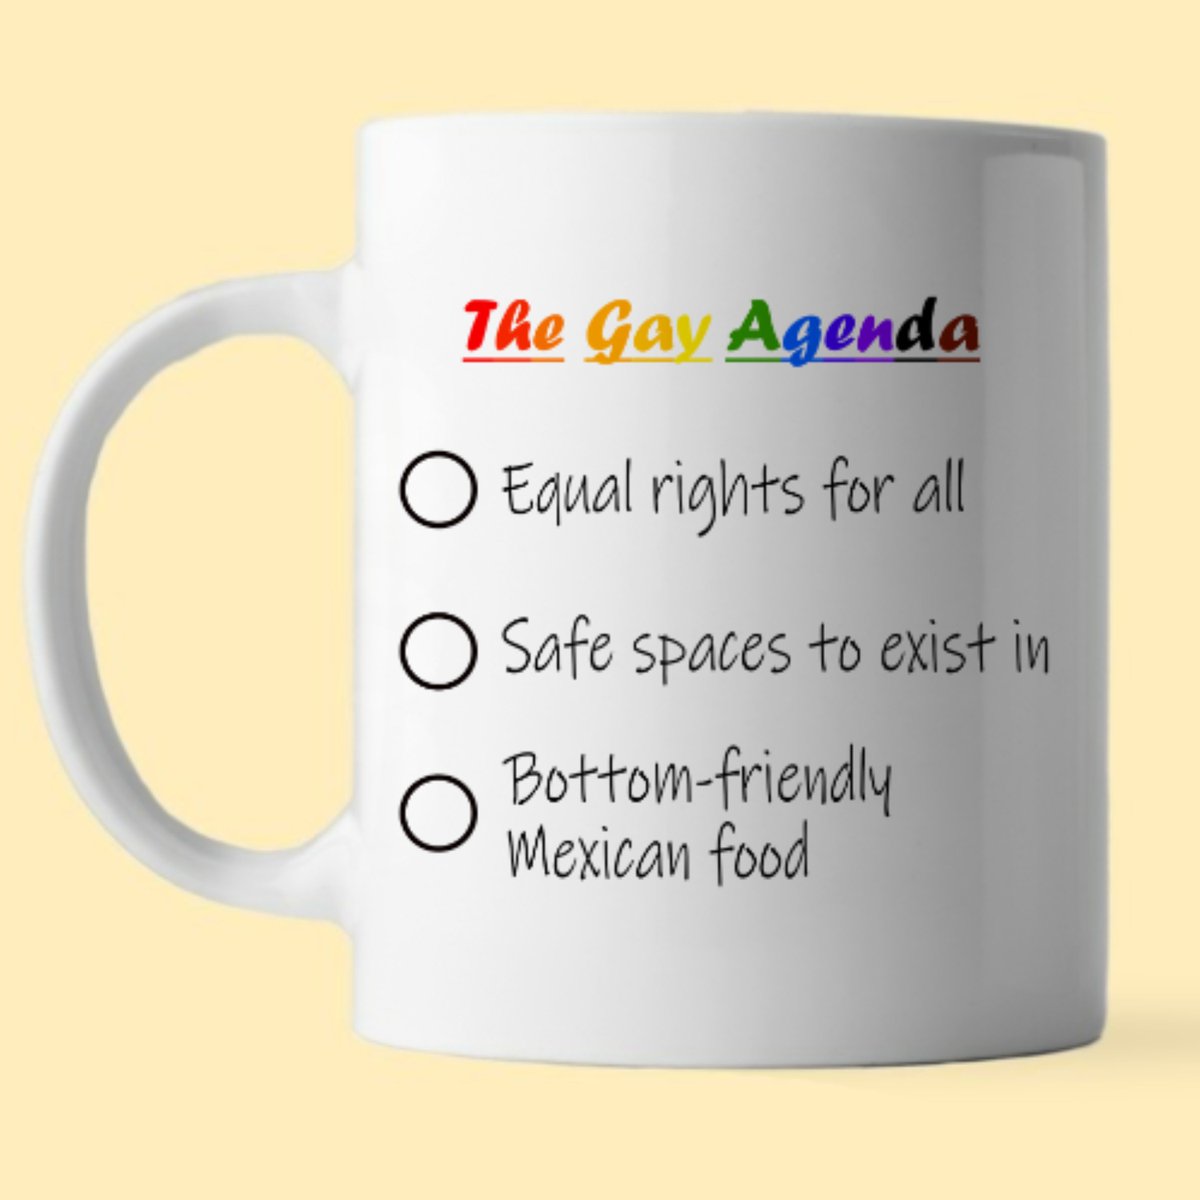 #NewProductAlert Now available on Etsy! The Gay Agenda is published...

#gayagenda #gayetsy #queer #queerbusiness #queeretsy #gay #smallbusiness #birmingham #localbusiness #supportsmallbusiness #mug #giftidea